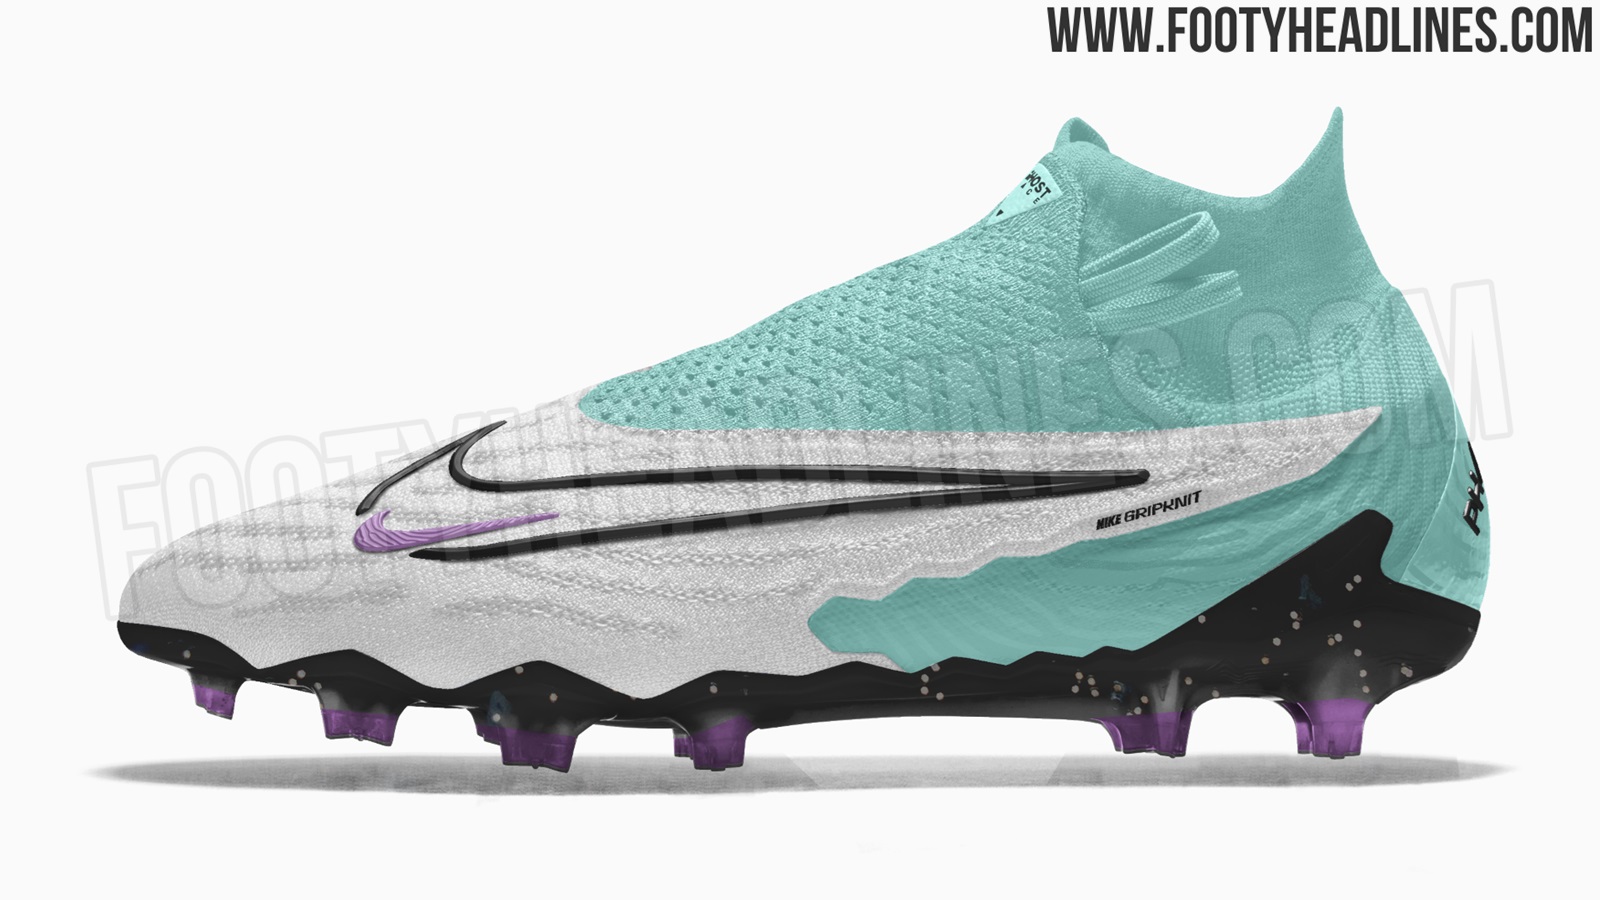 Exclusive: Nike Phantom GX 2 'Champions League' 2023 Boots Leaked